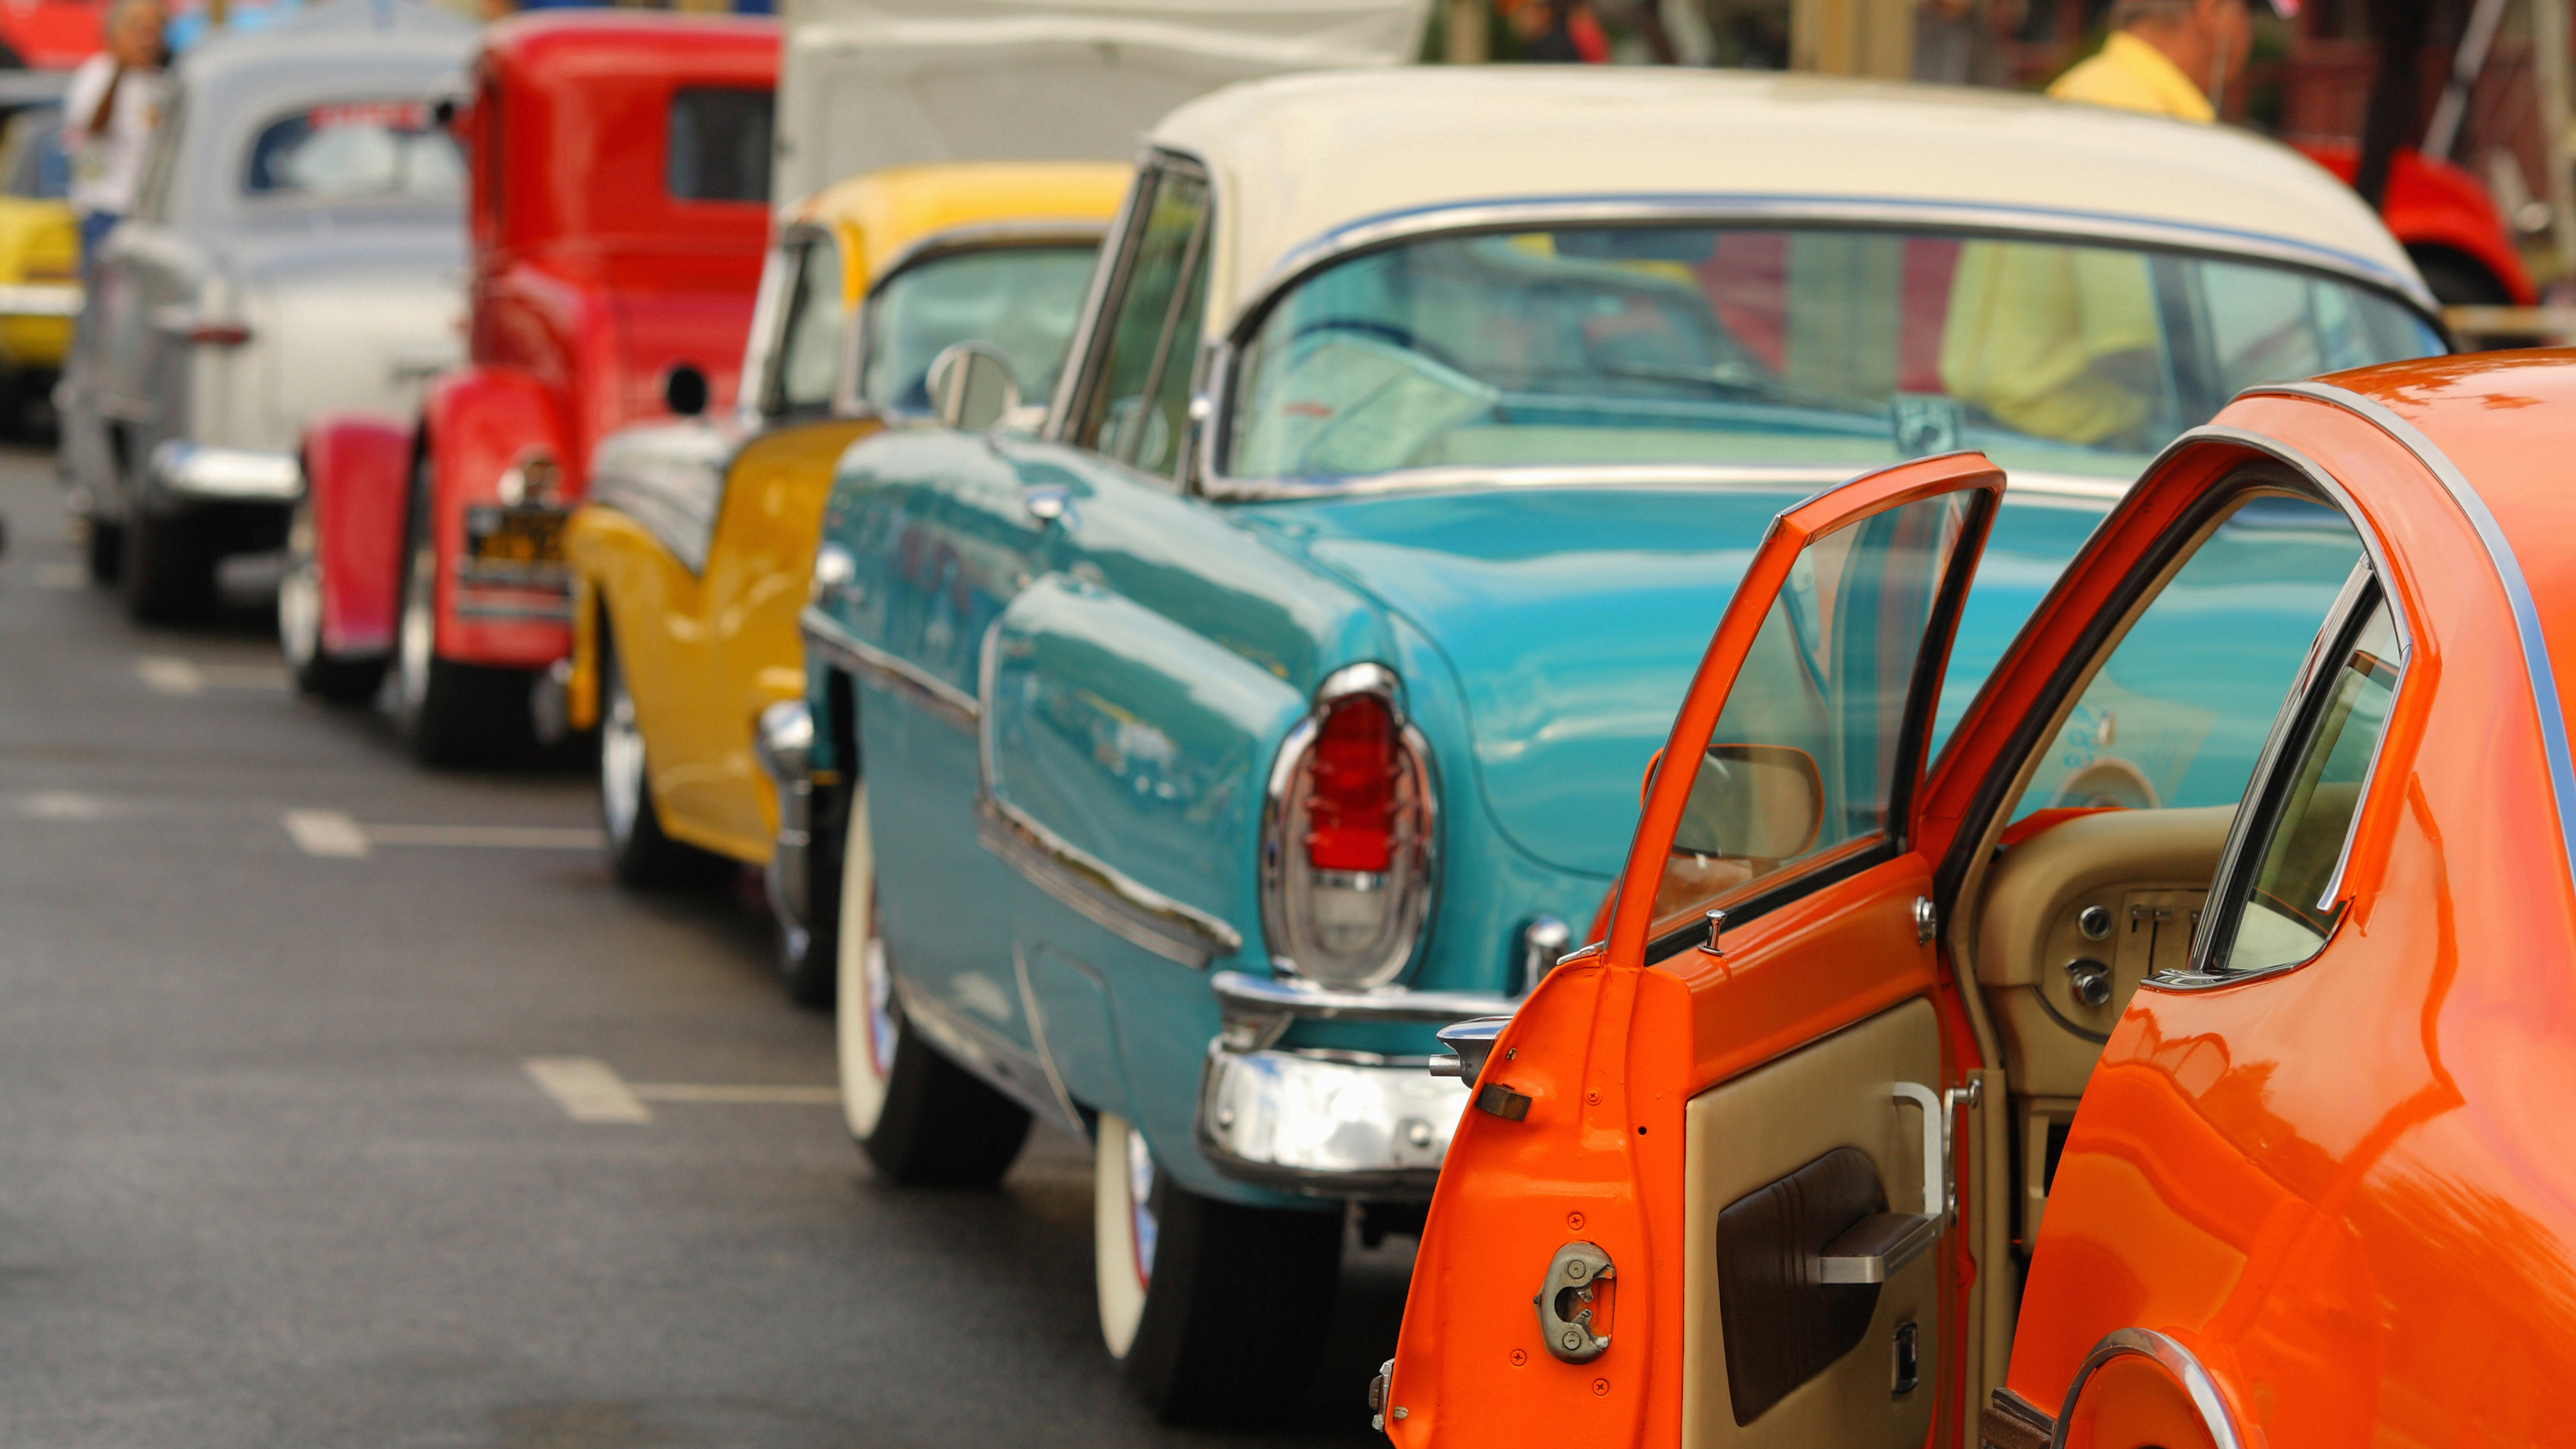 A row of parked vintage cars